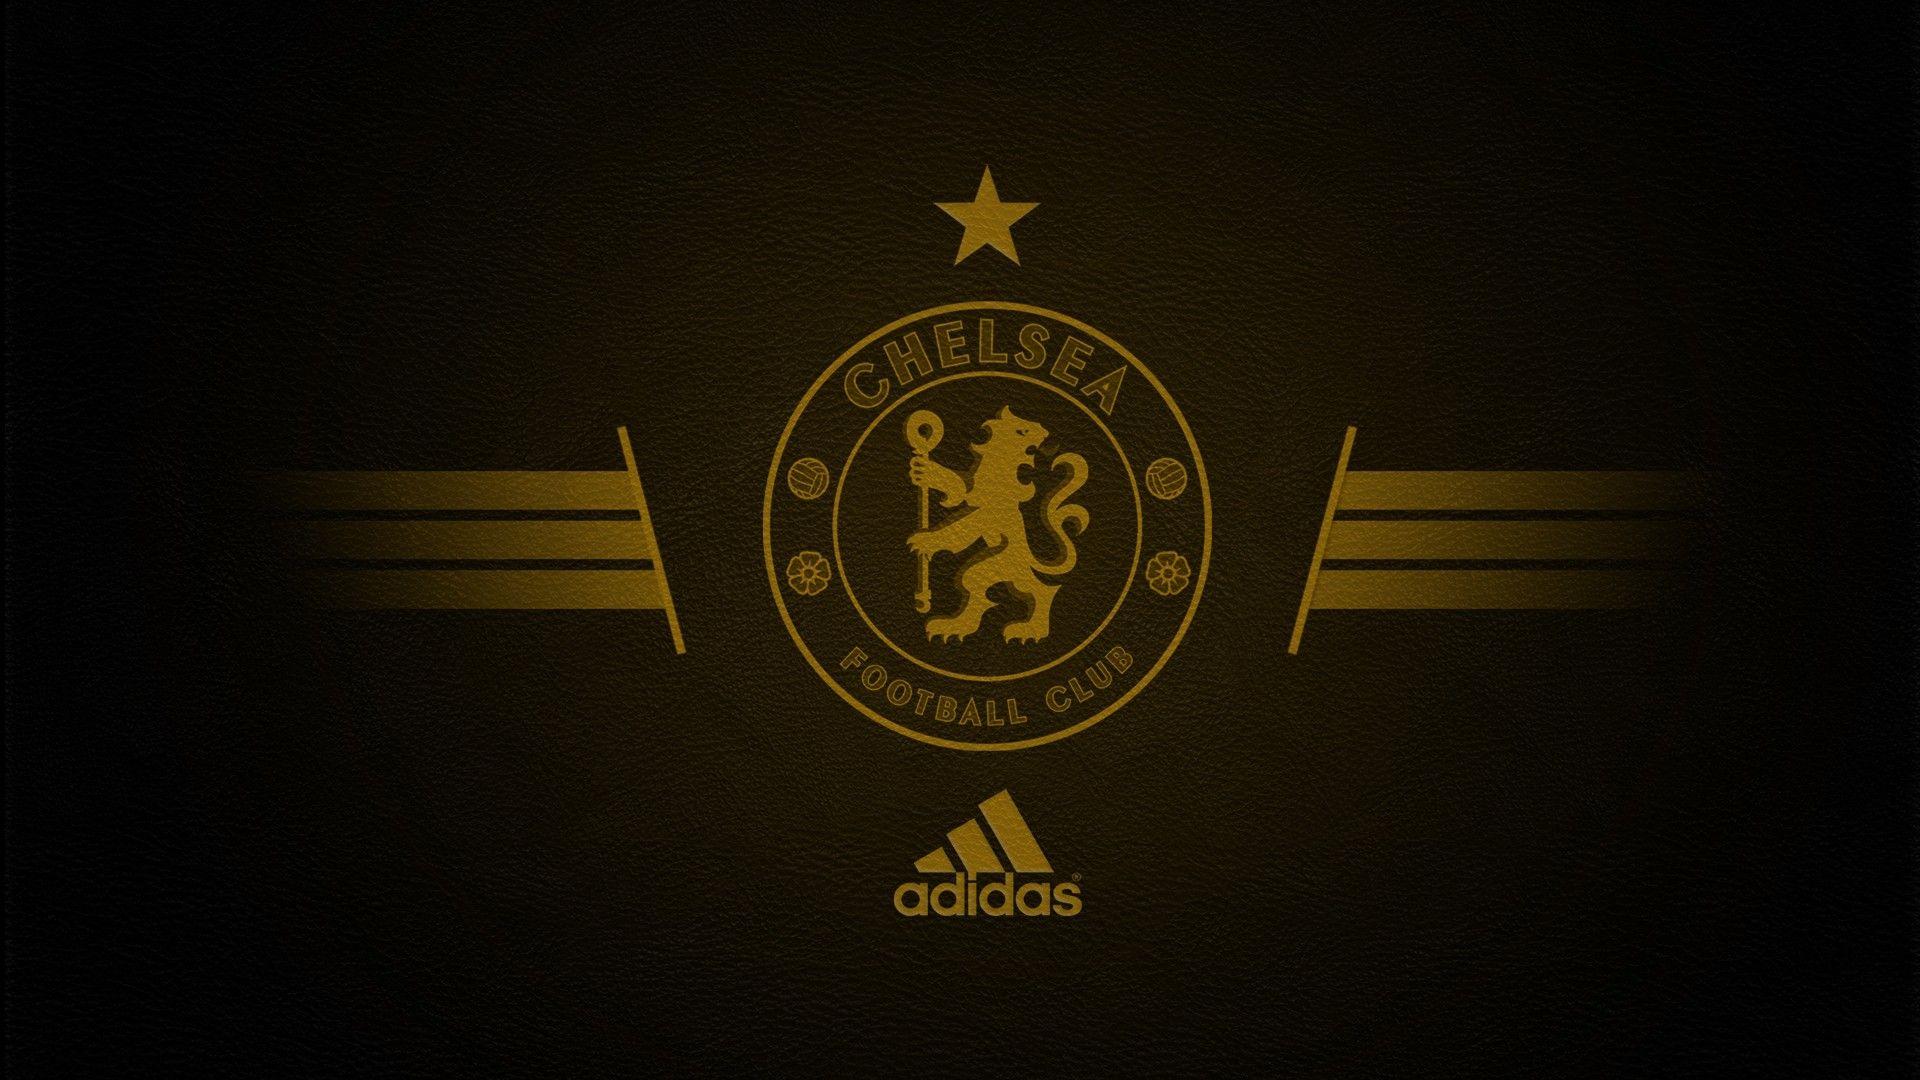 Wallpaper.wiki Chelsea Adidas Soccer Football Club Background PIC